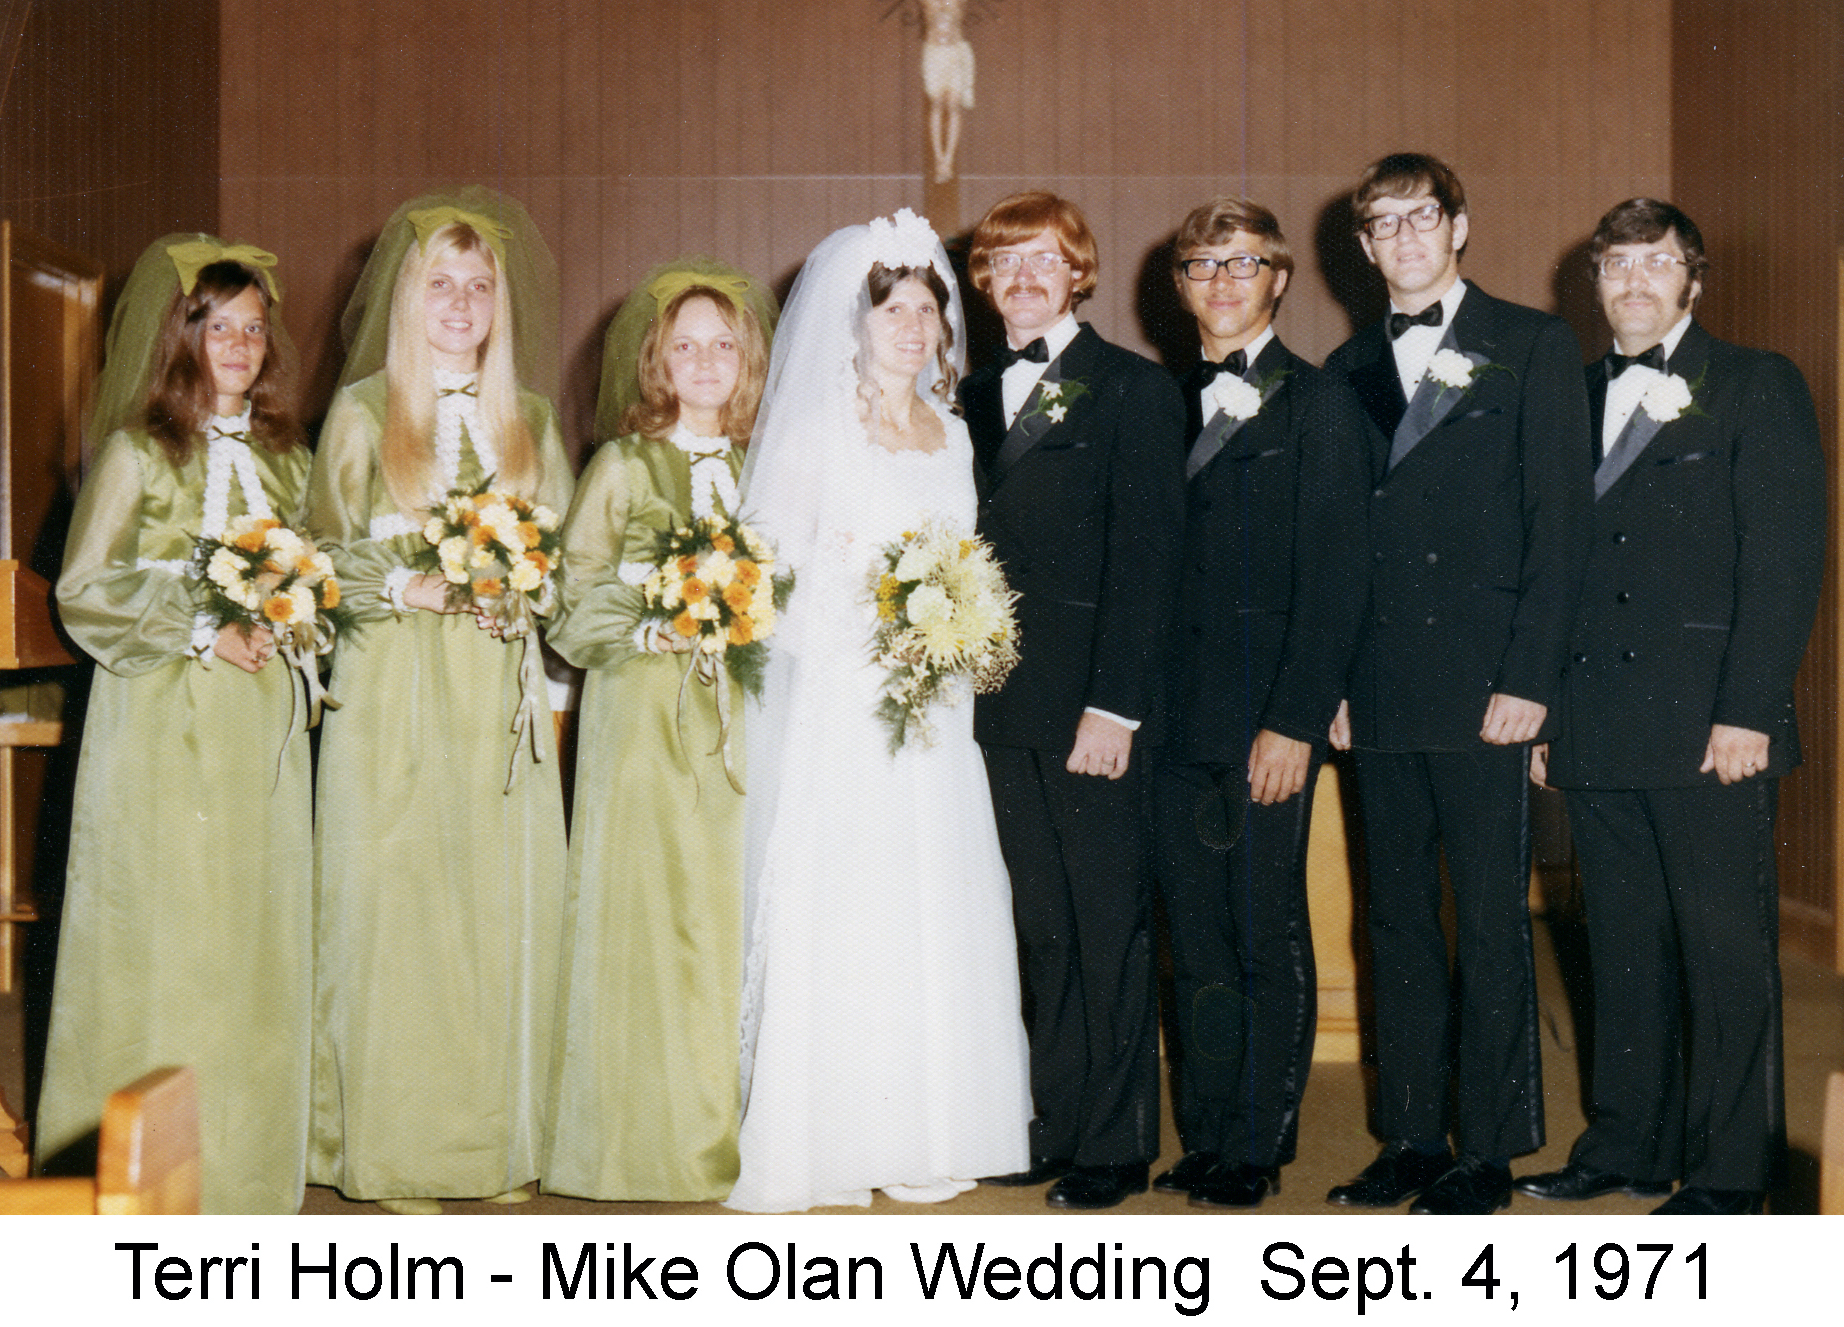 Terri Holm and Michael Olan at the altar with attendants on each side